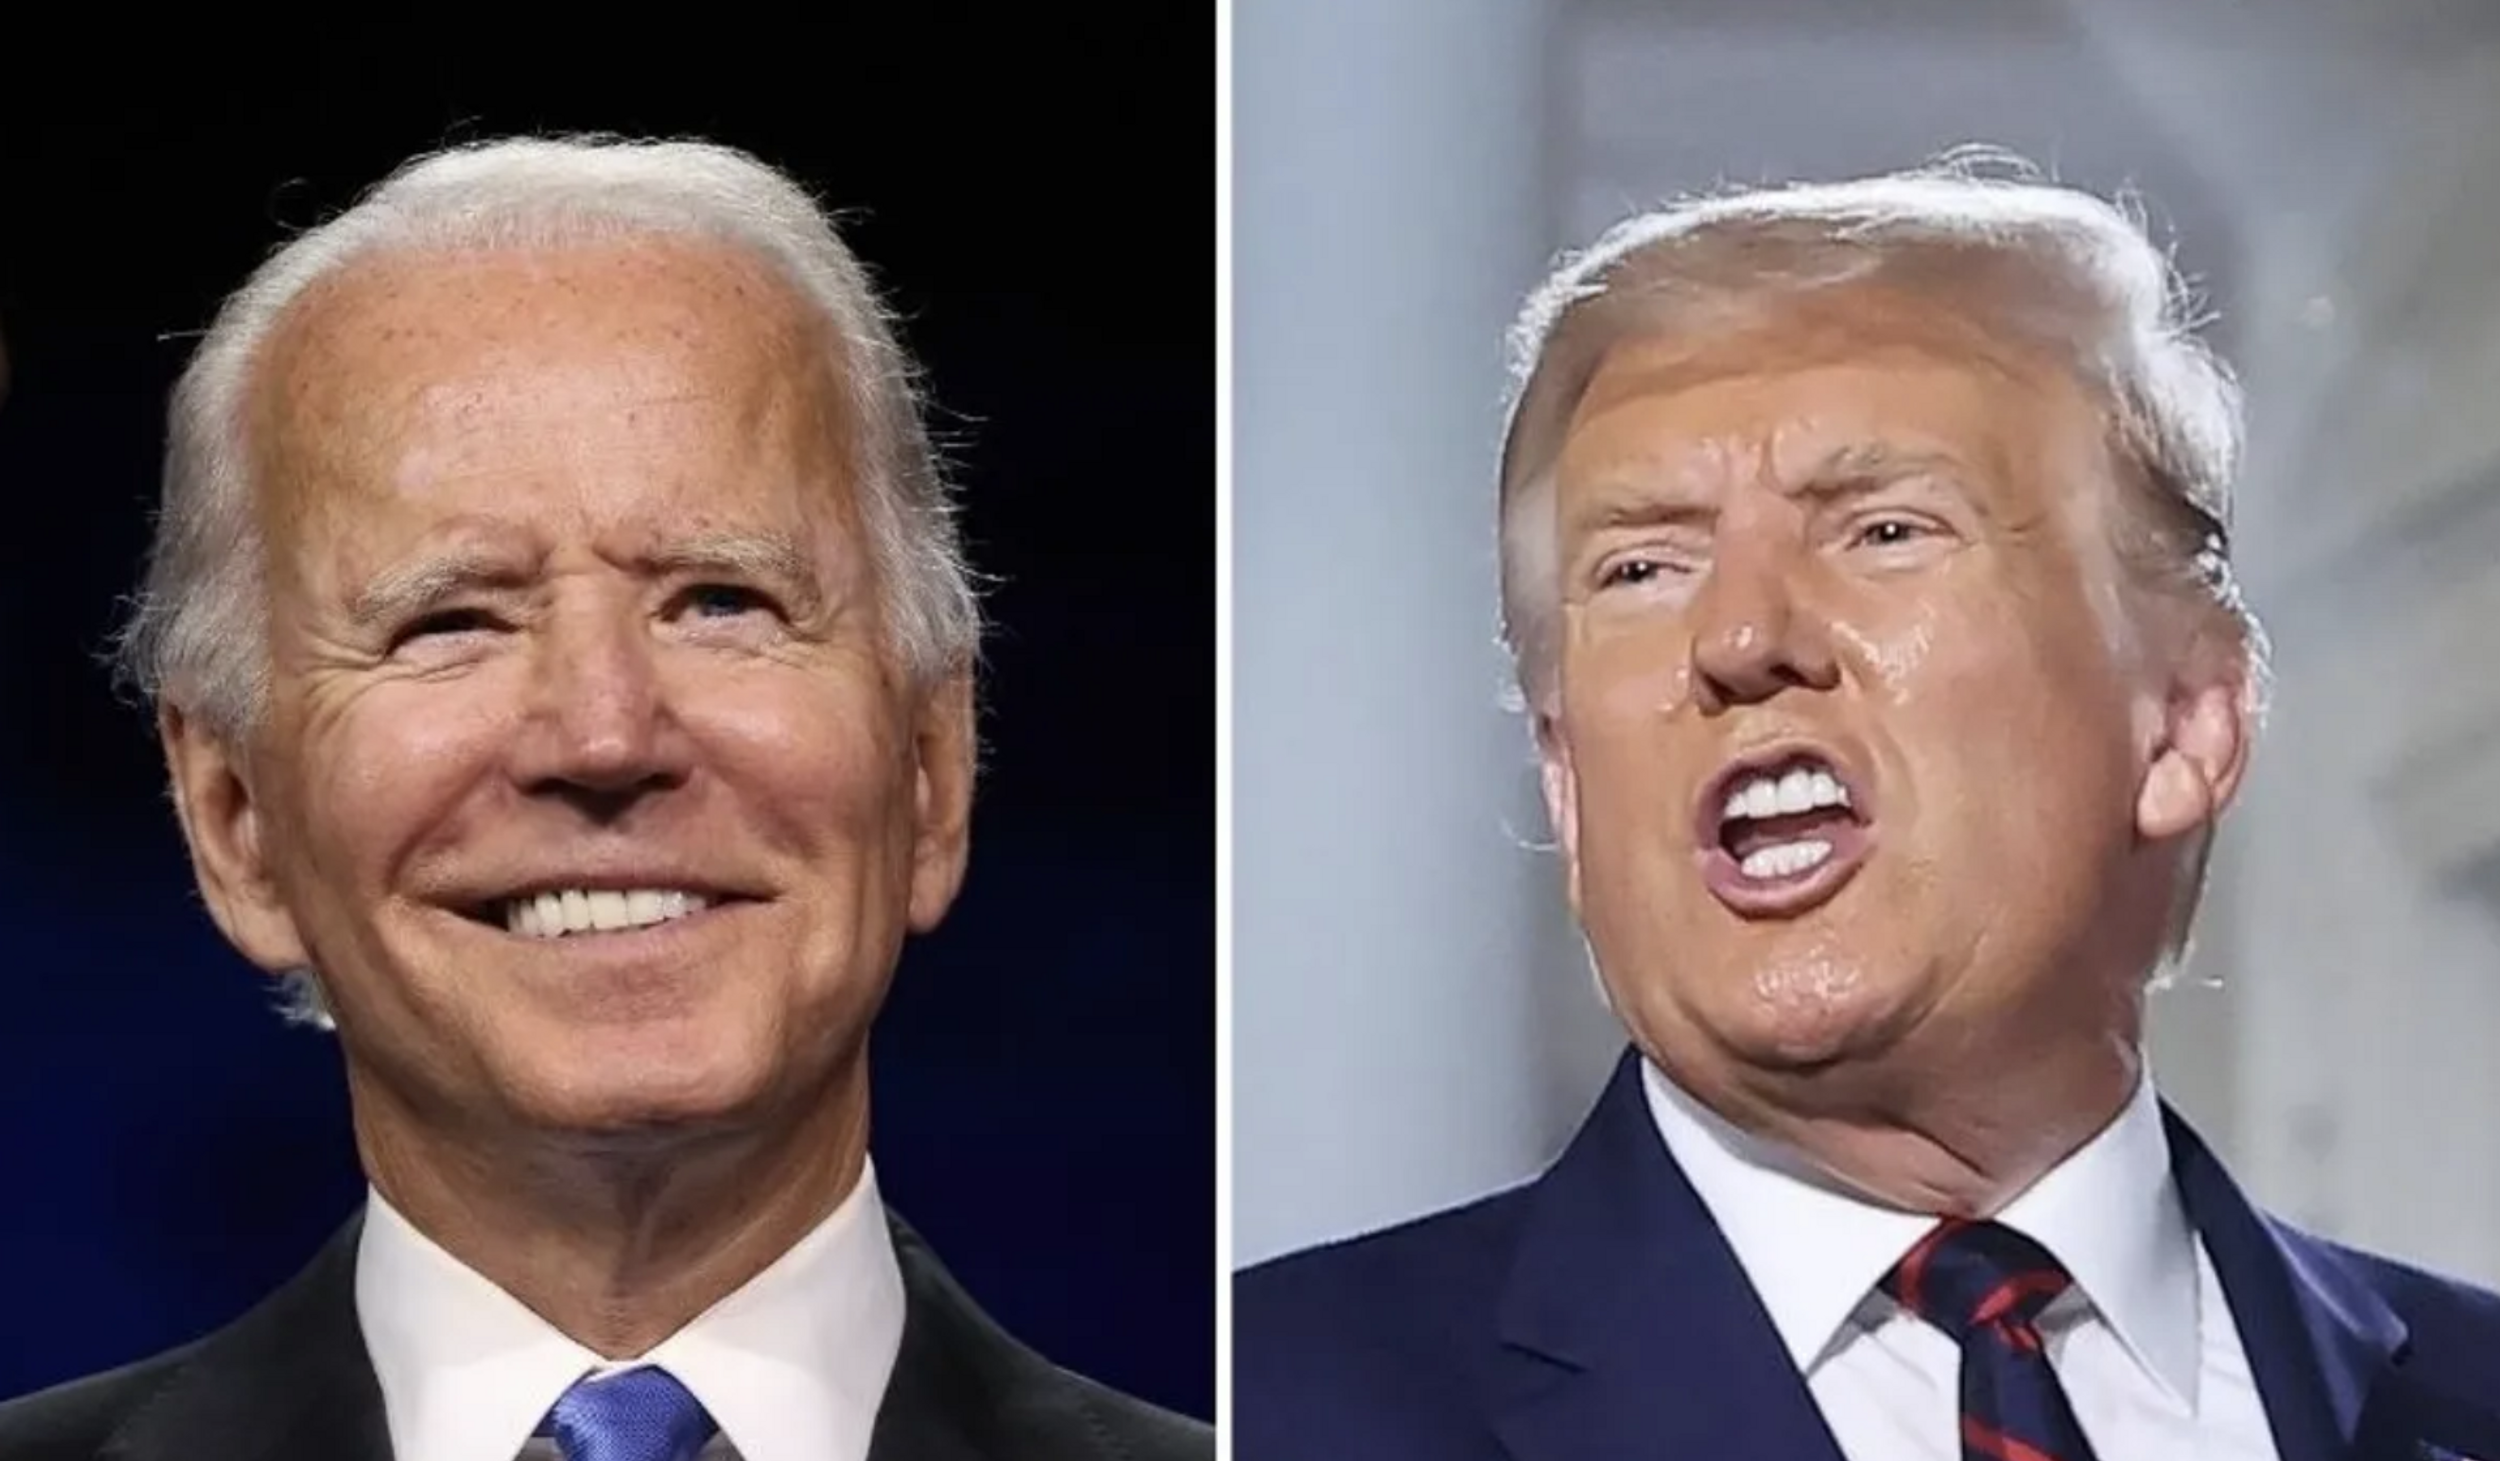 Biden Campaign Savagely Mocks Trump for Calling for Drug Tests Before His Debate With Biden